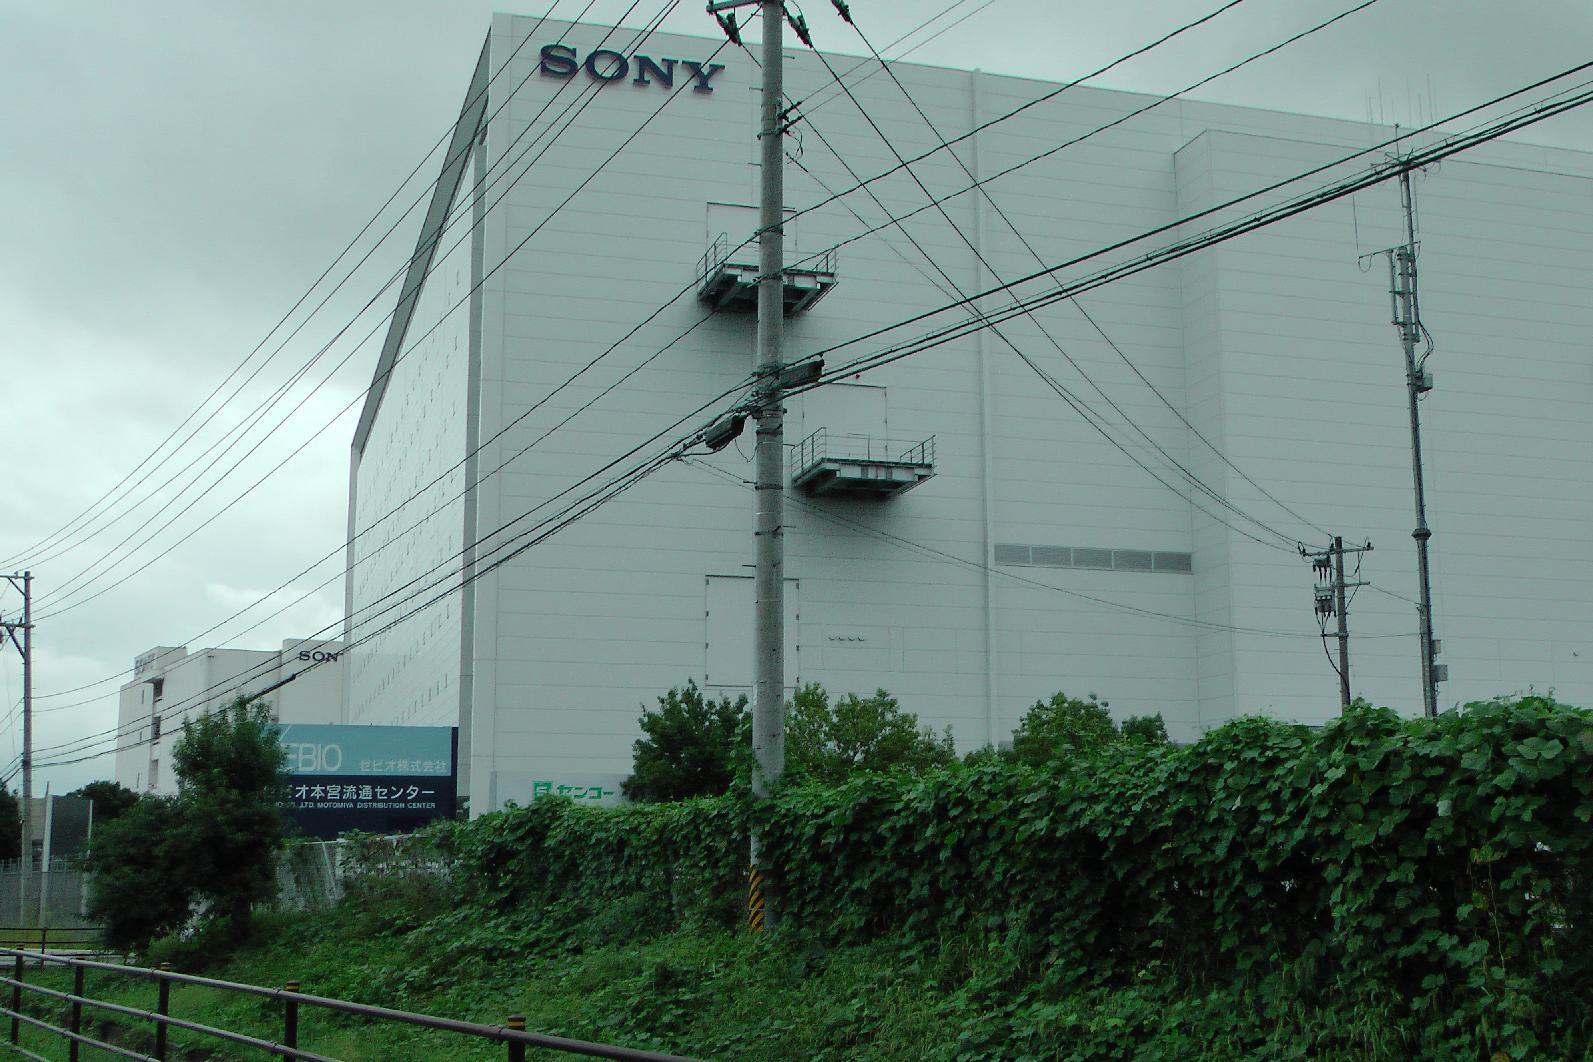 Sony's battery and accumulator factories in Motomiya